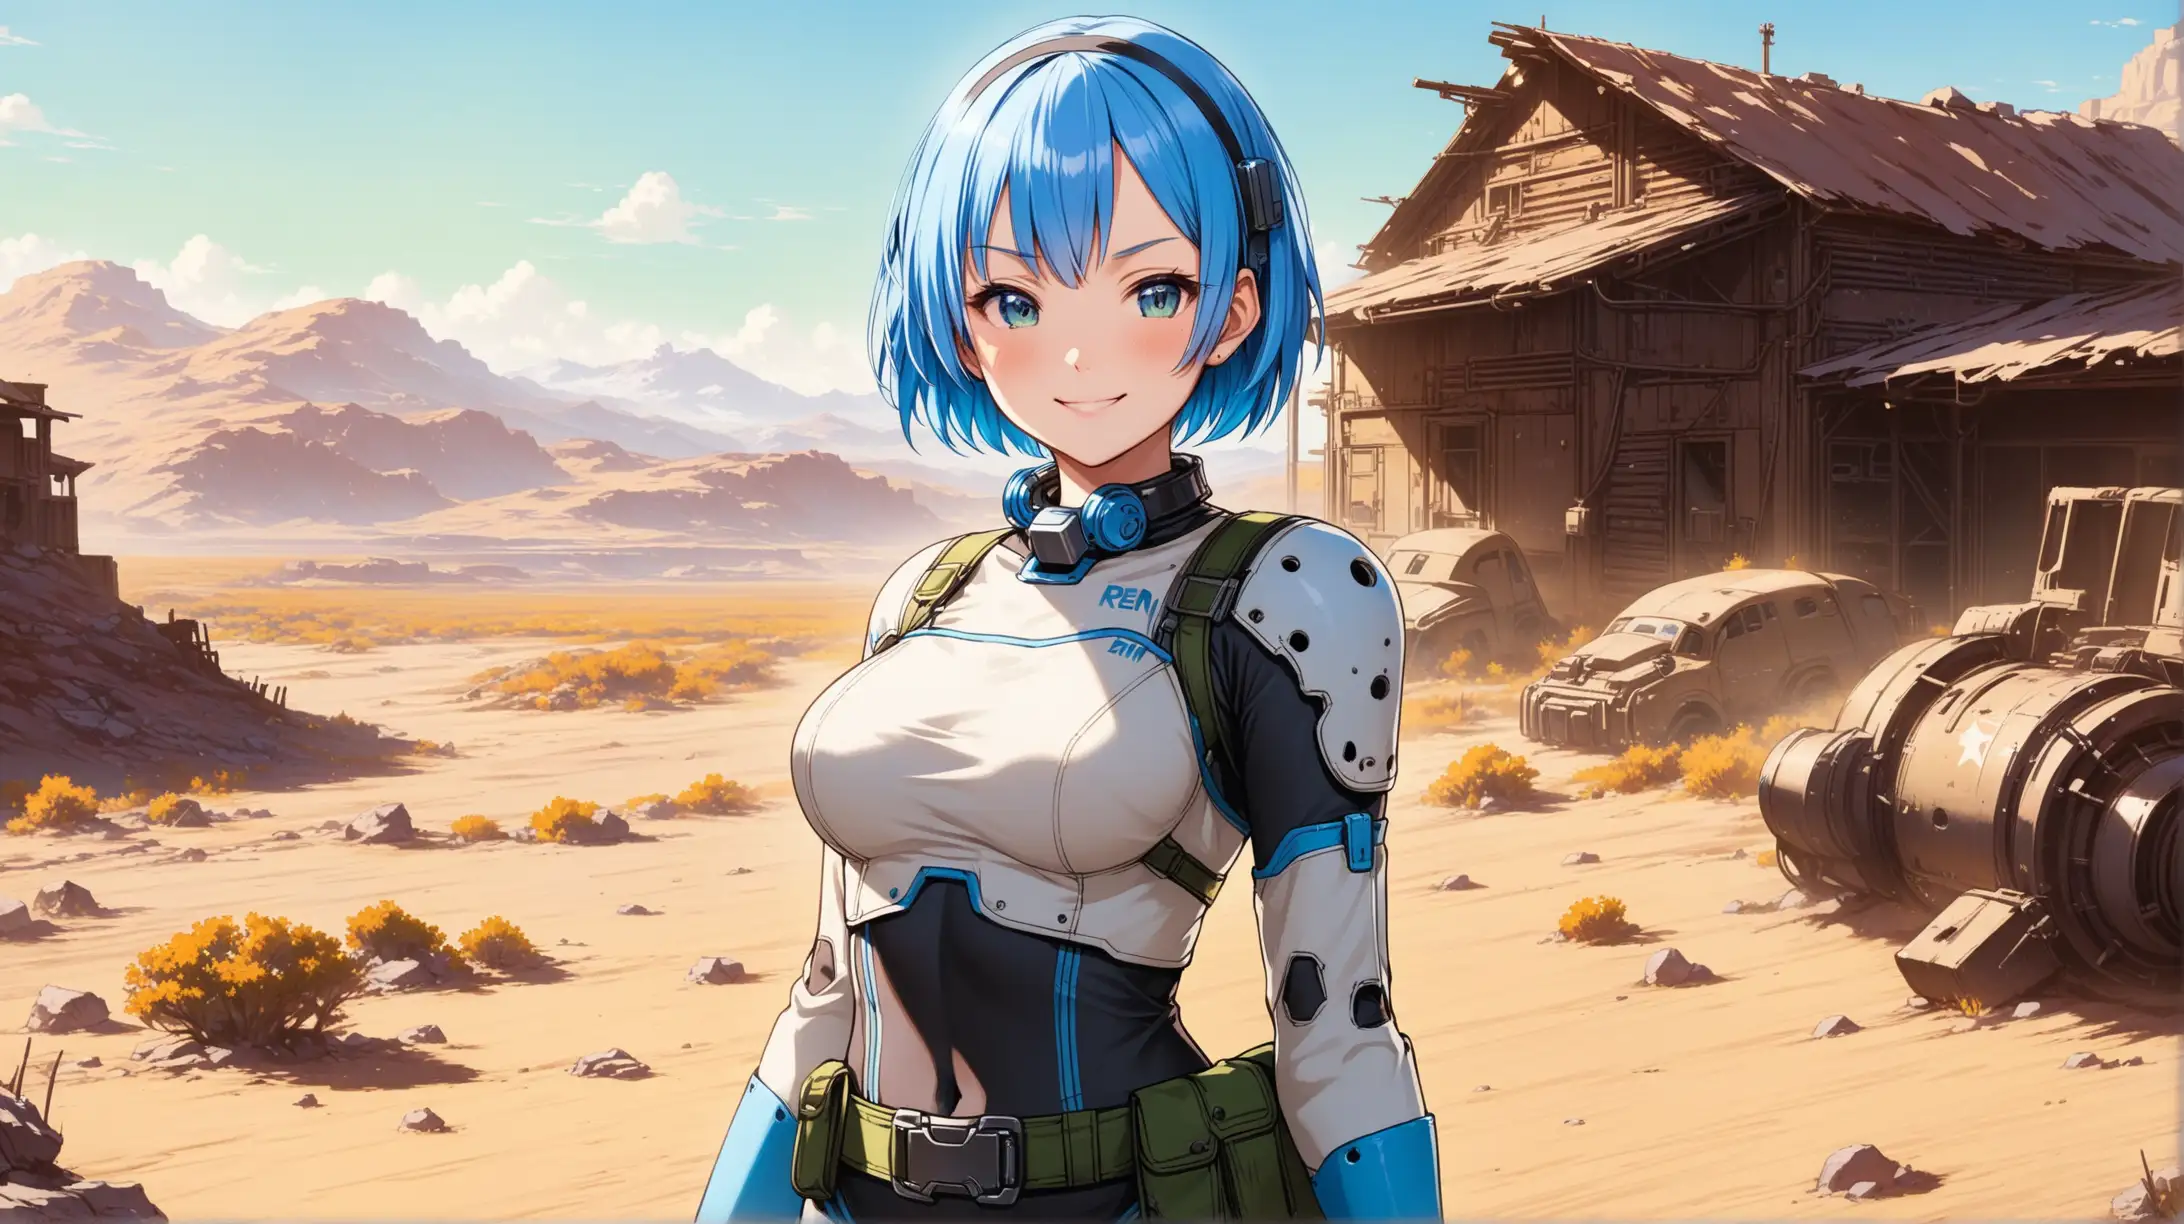 Draw the character Rem, high quality, in a confident pose, outdoors, on a sunny day, cowboy shot, wearing an outfit inspired from the Fallout series, smiling at the viewer